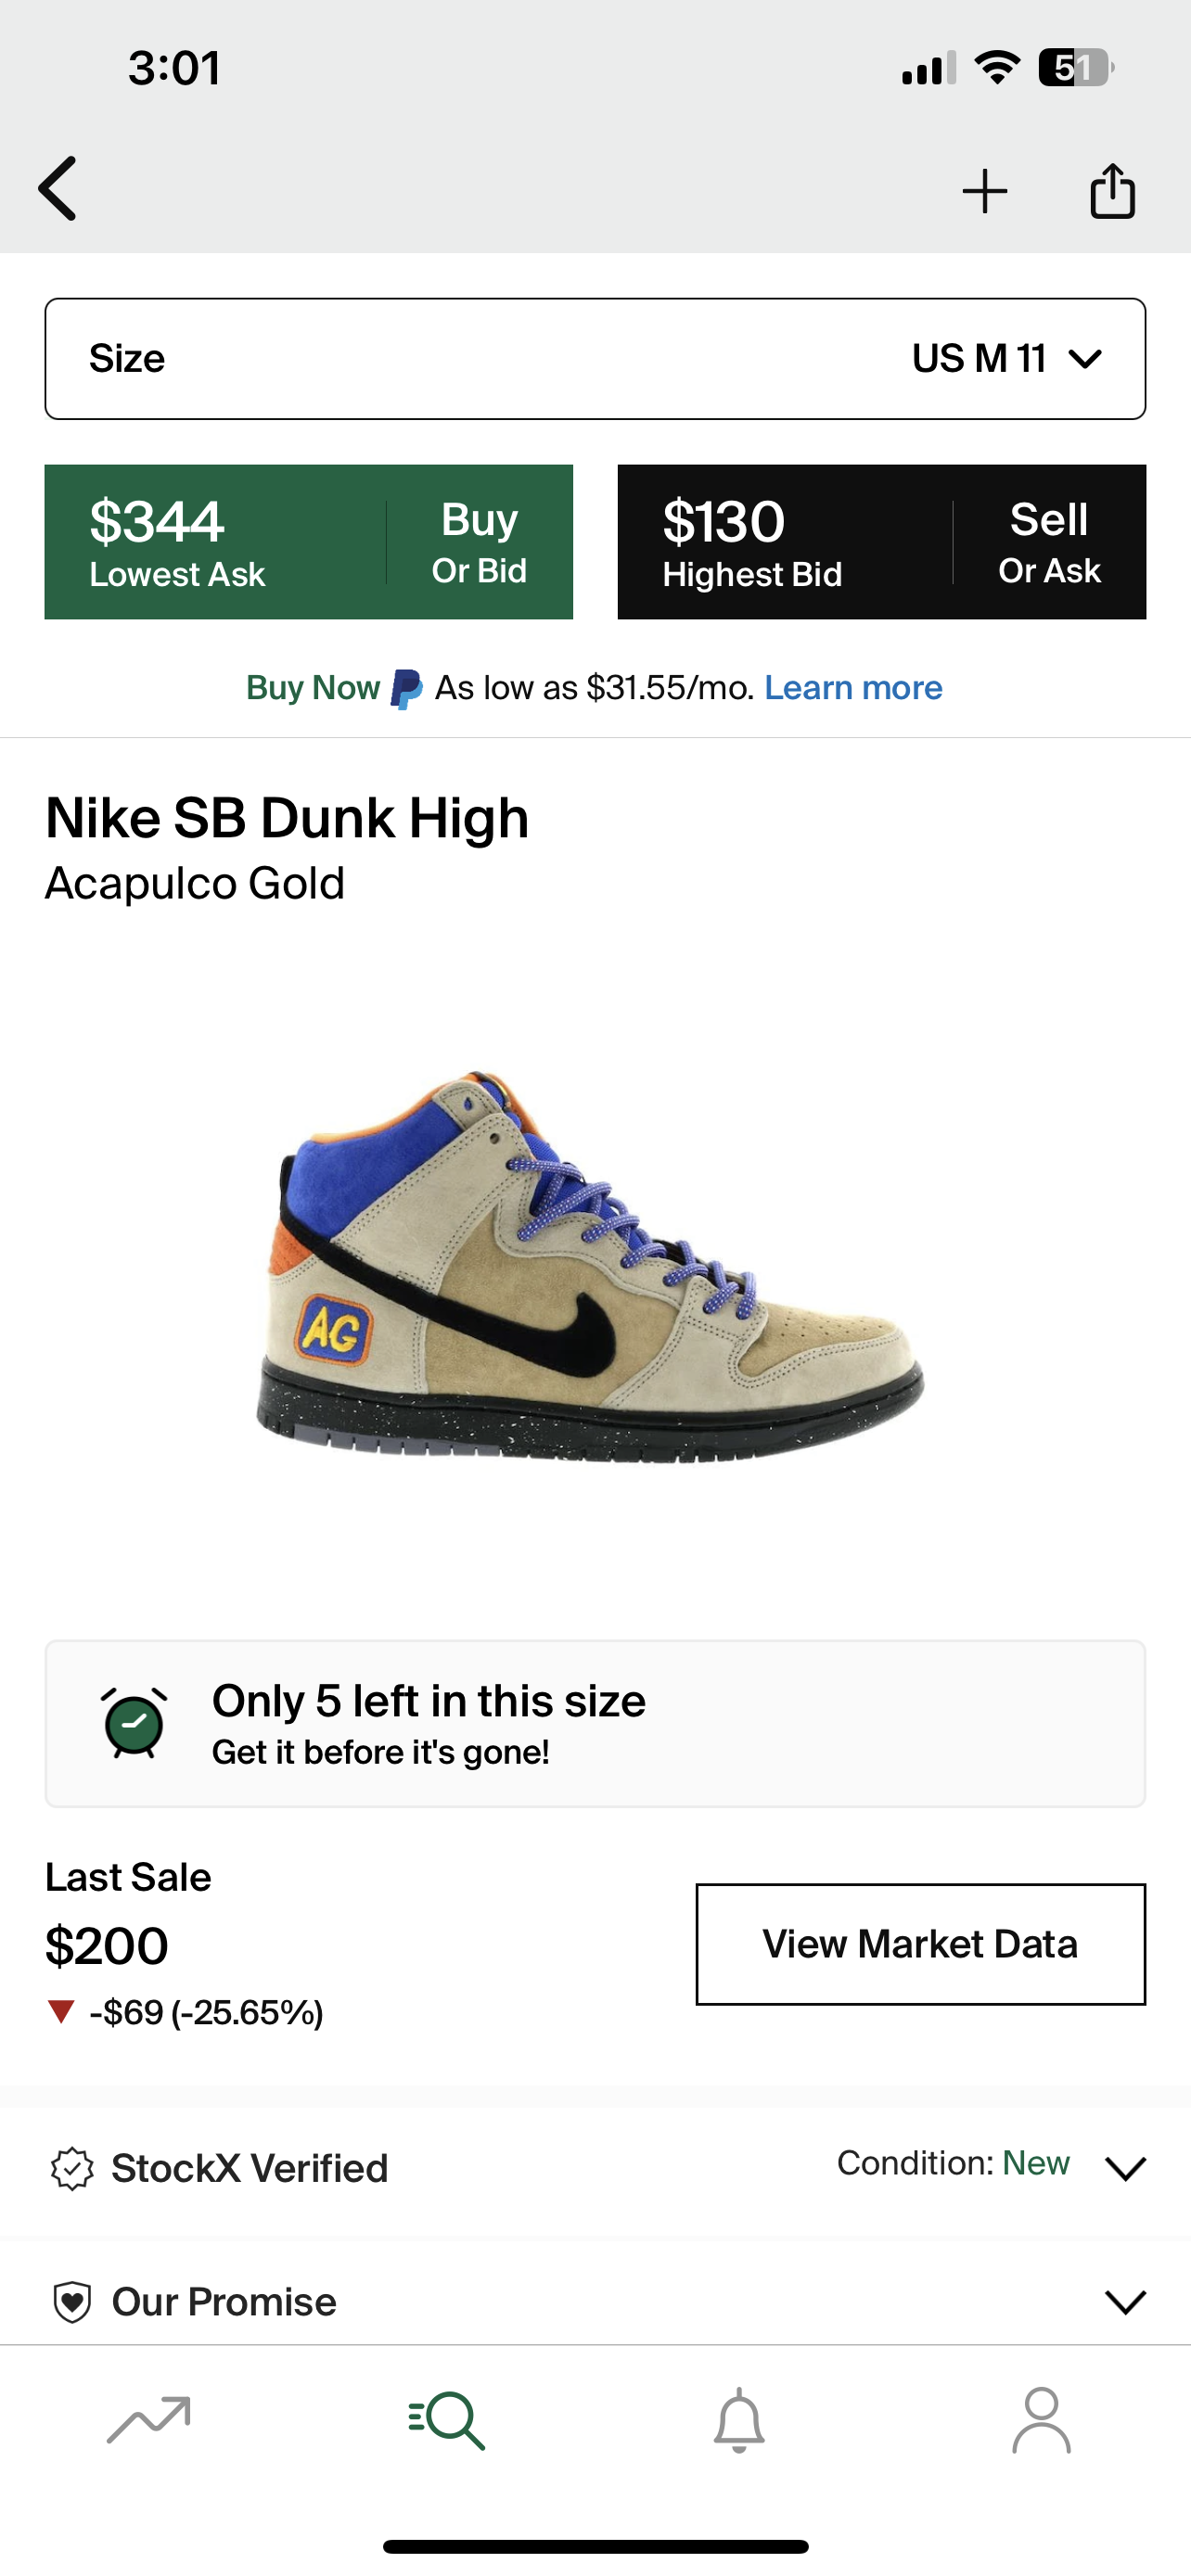 Nike Dunk High Acapulco Gold Size 11 PO NB Trusted Club MKE